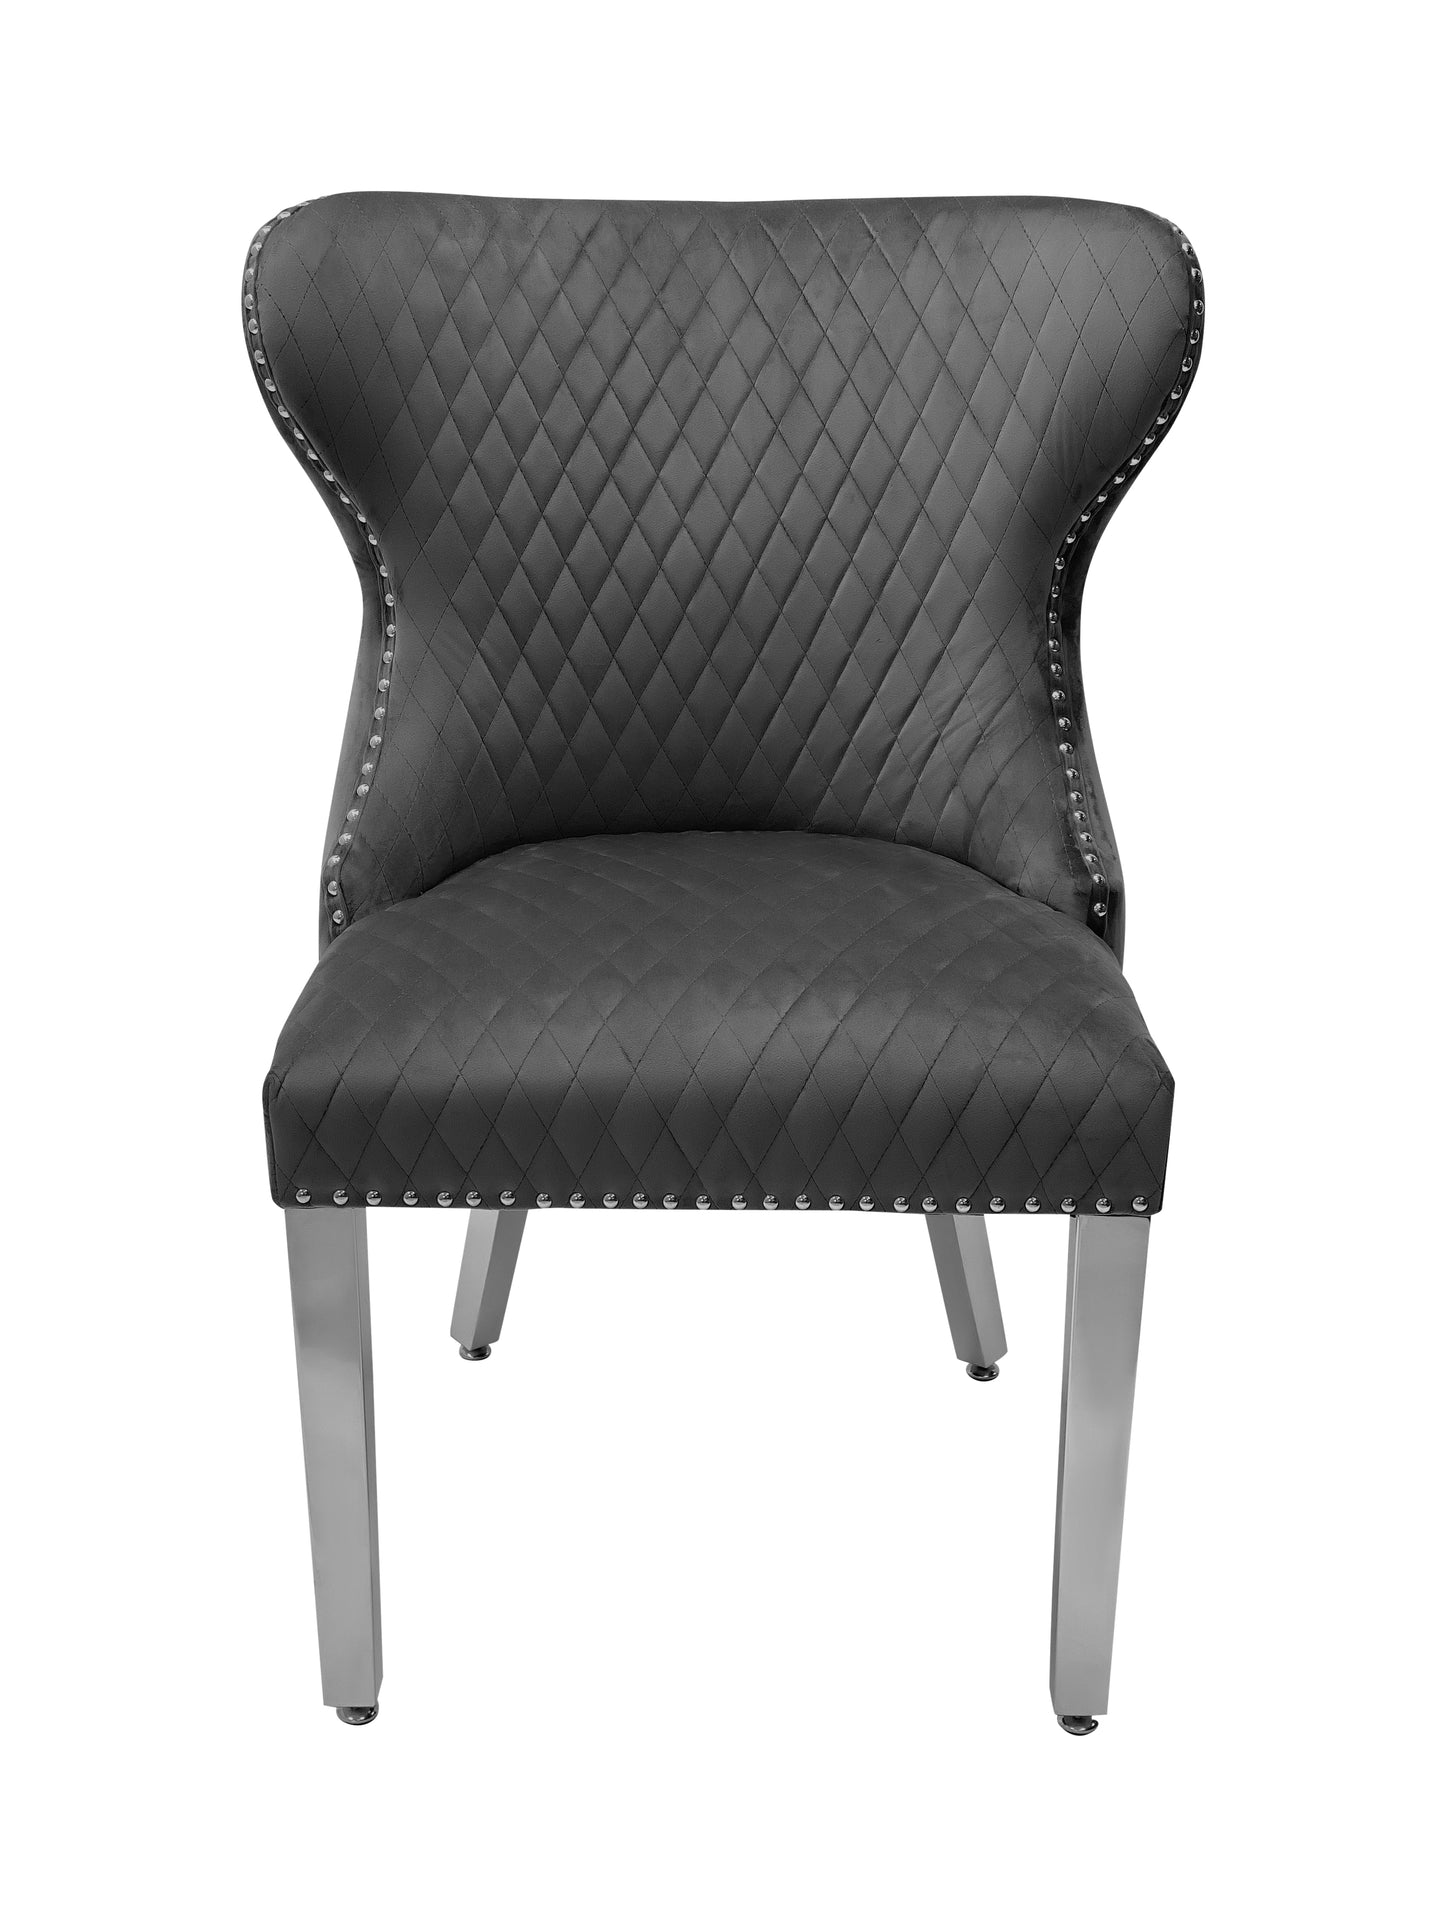 Dining Chair in Grey Plush Velvet Lion Knocker Head Lewis Buttoned Back Quilted Front Studs on the Edge with Chrome Legs (Set of 2 chairs)